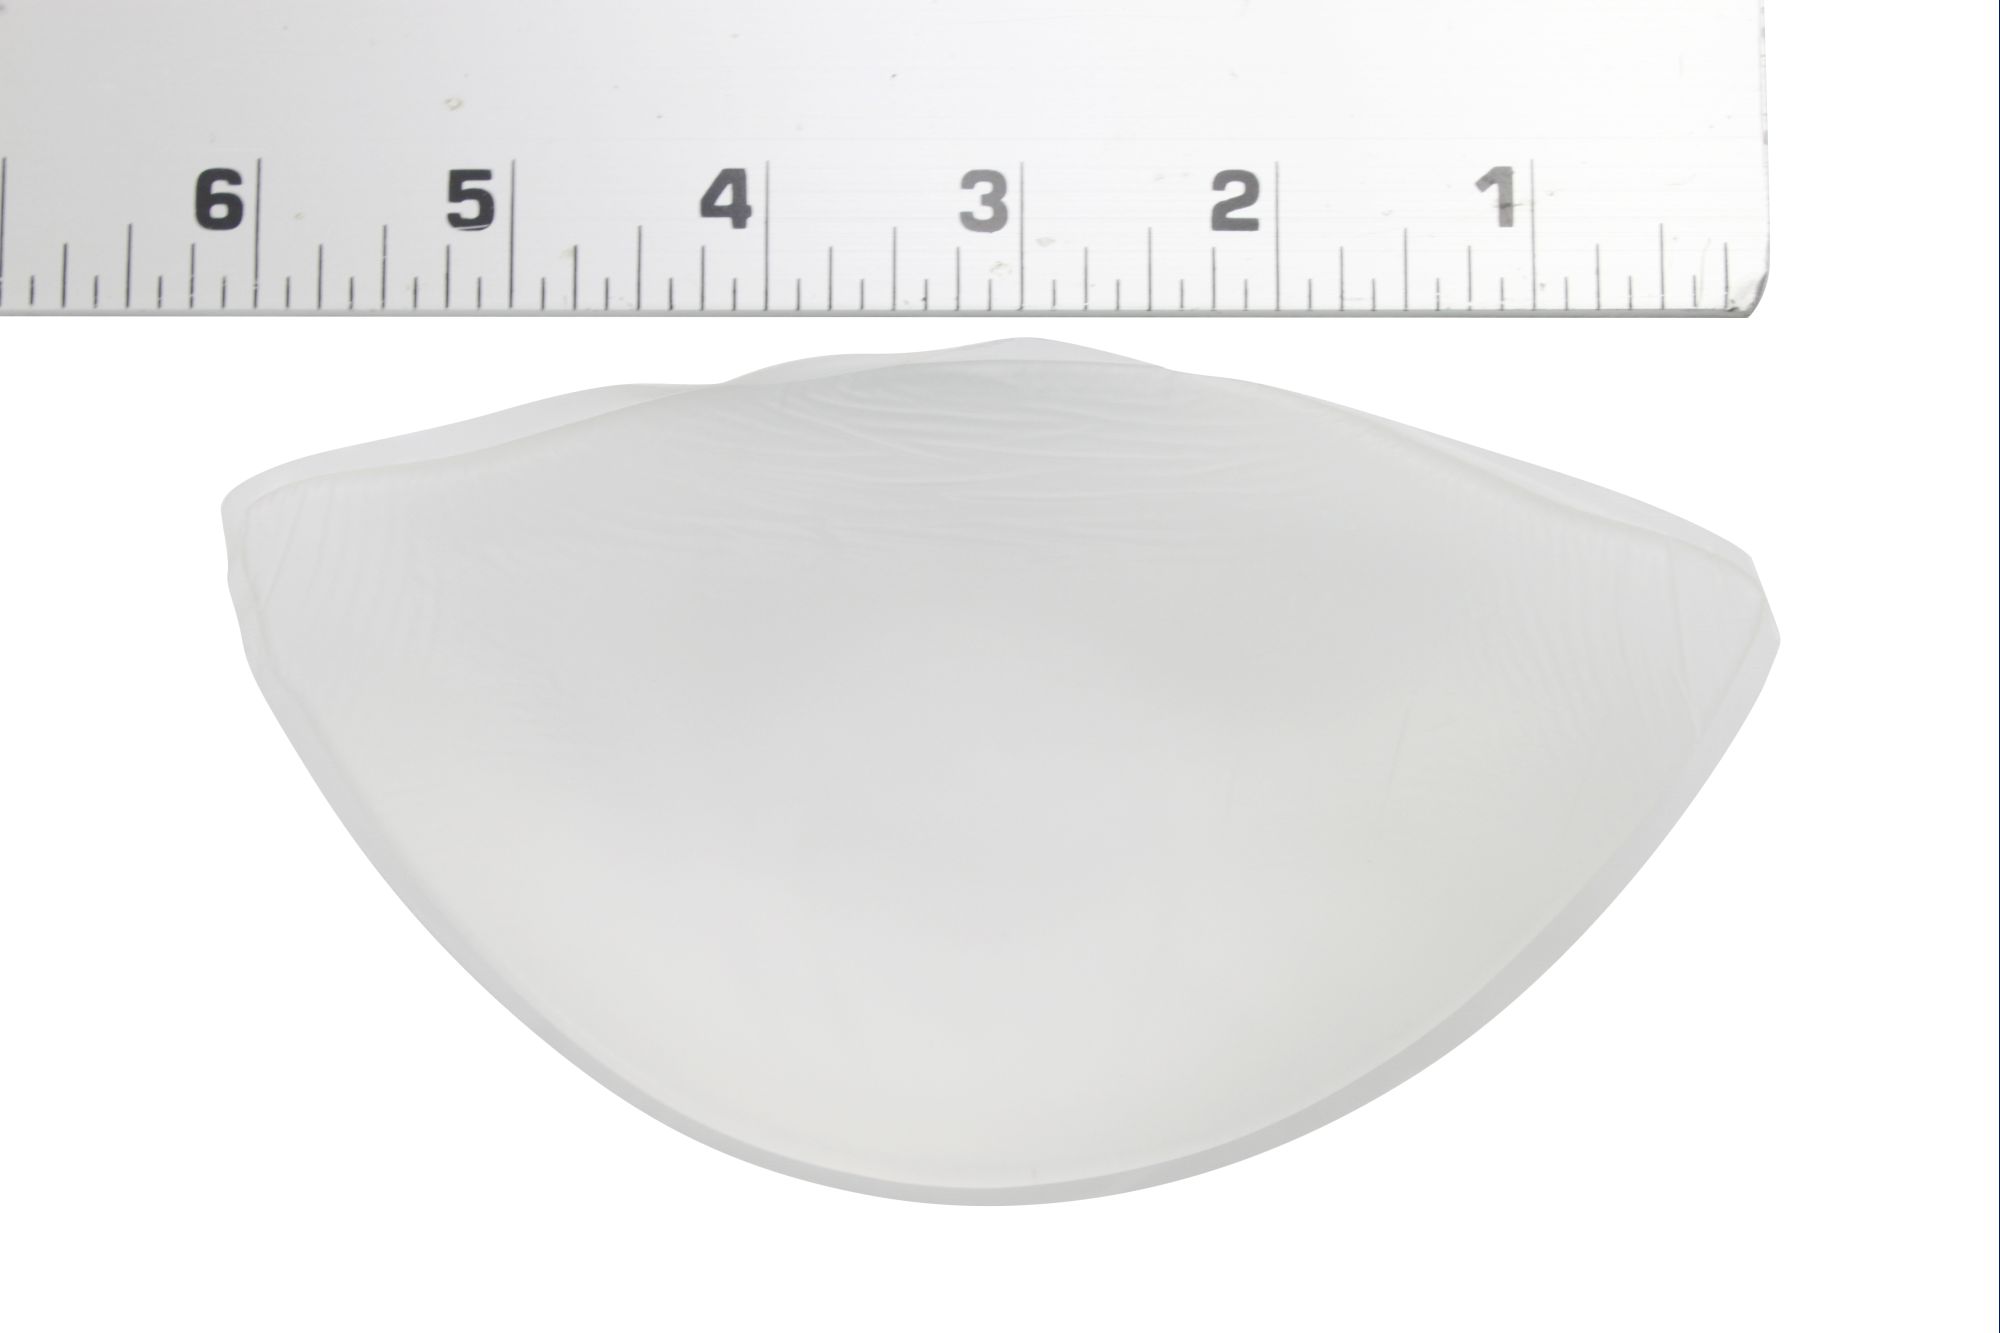 Curvana Clear Silicone Bra Inserts - 1 Size Increase pushup. Chicken Cutlets